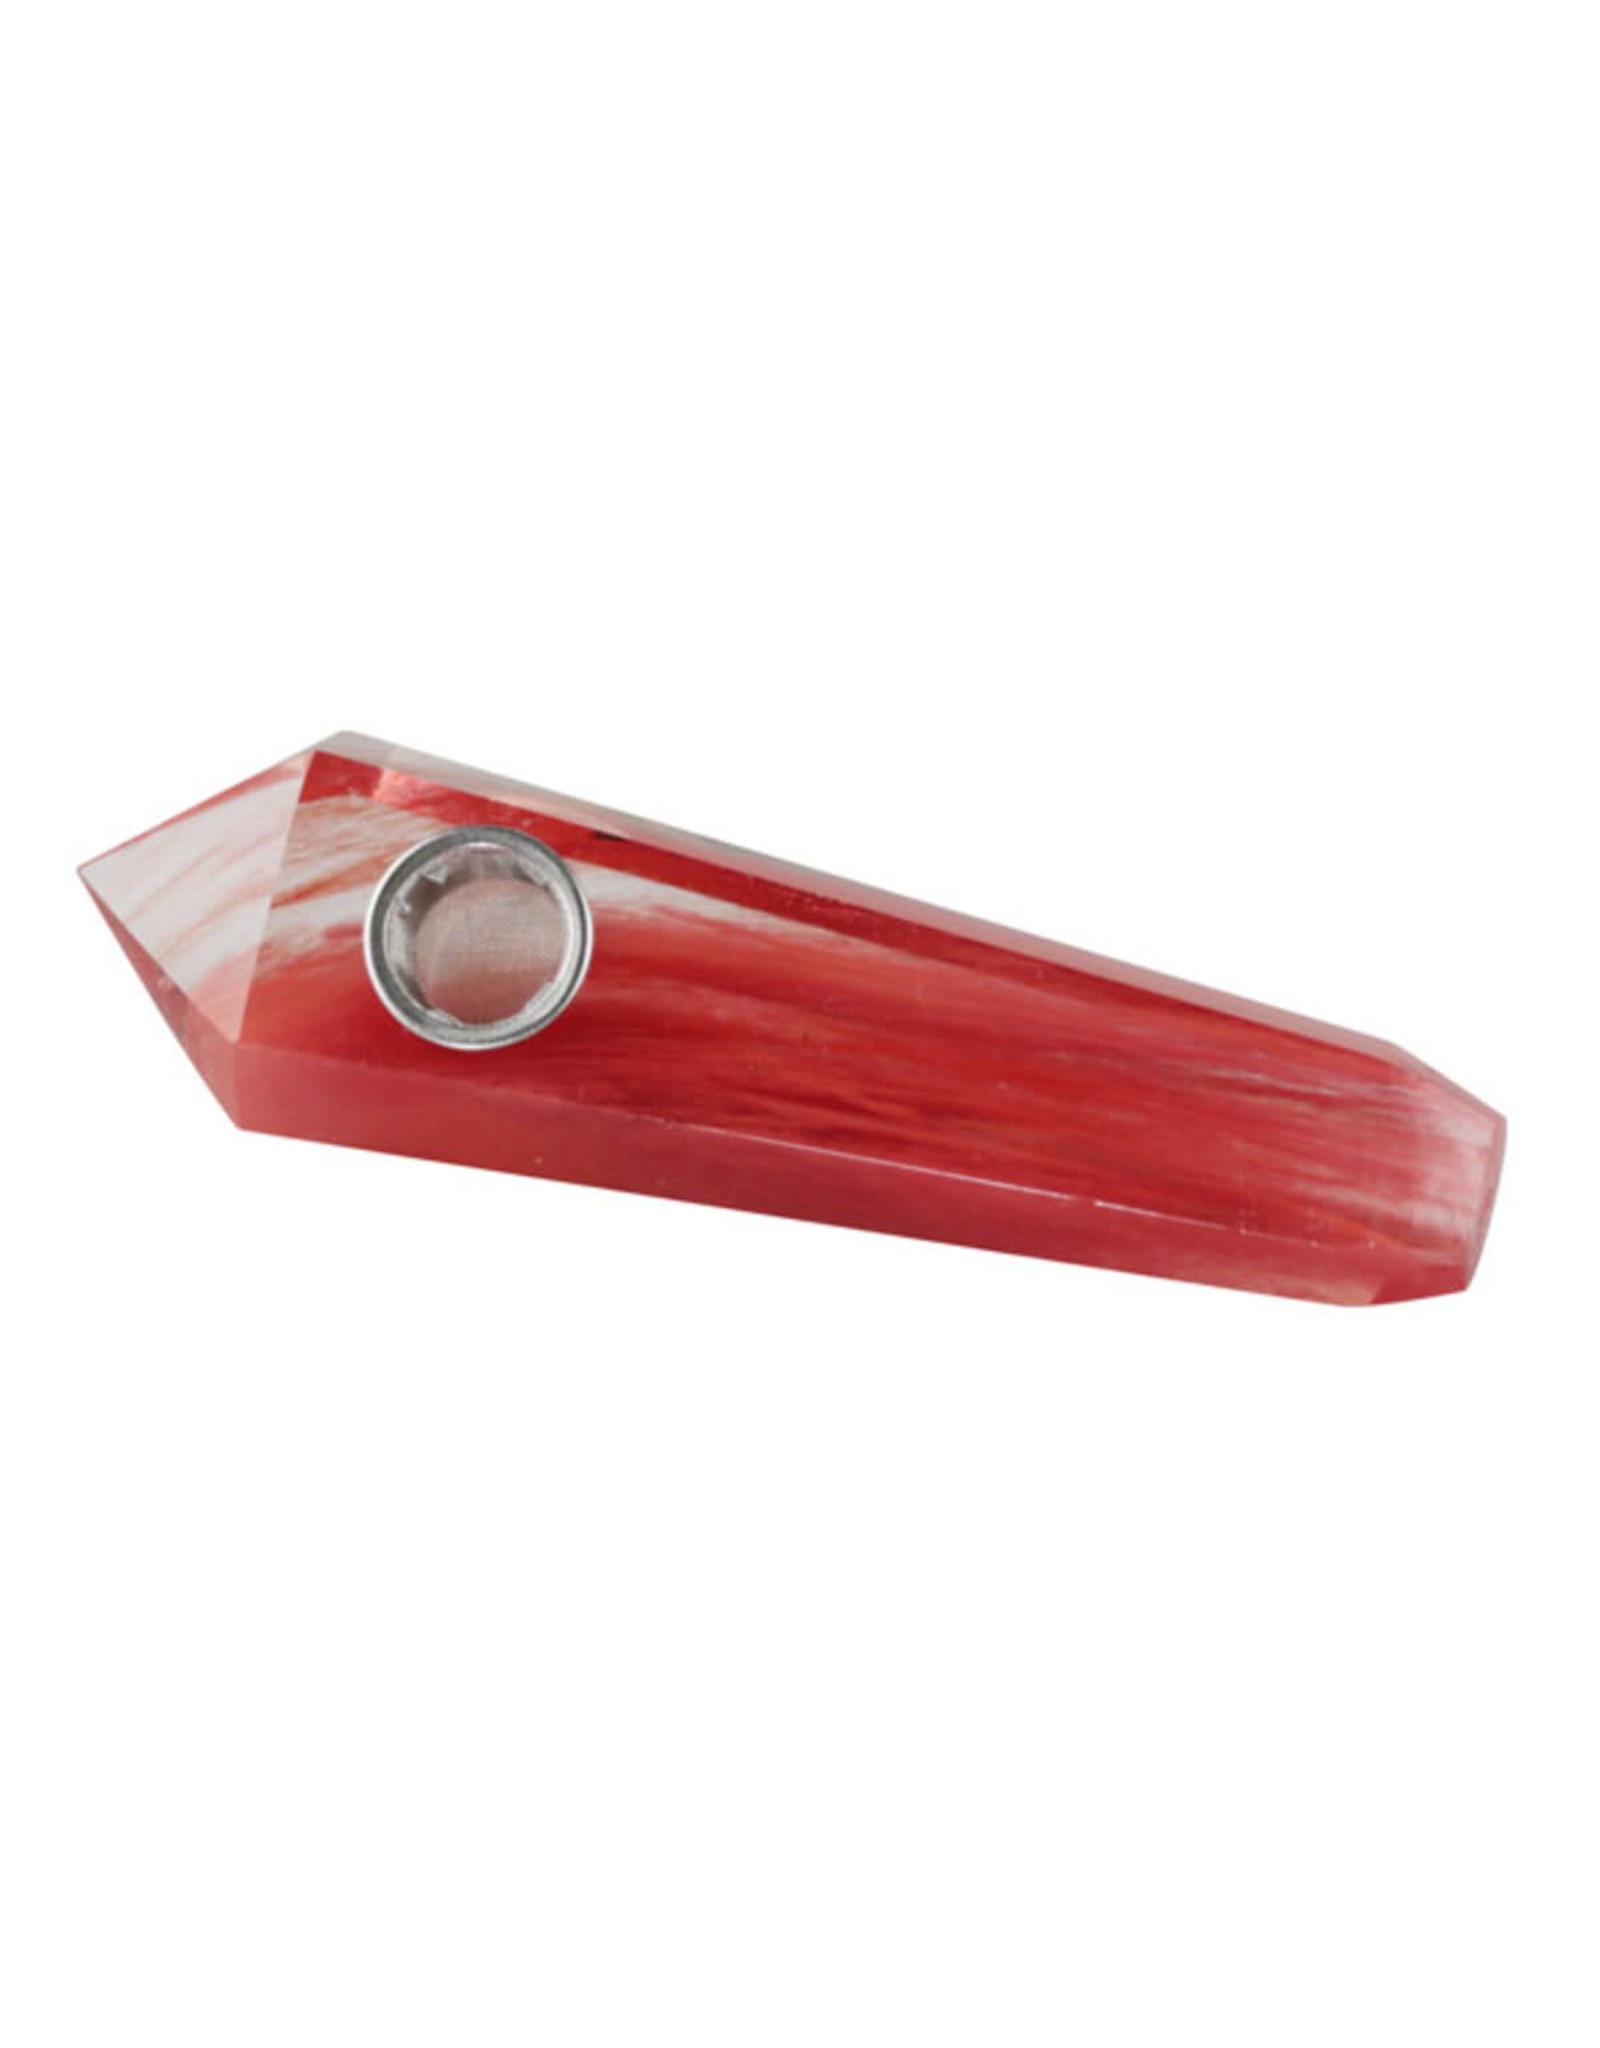 Real Gemstone Hand Pipes  - Red Crystal